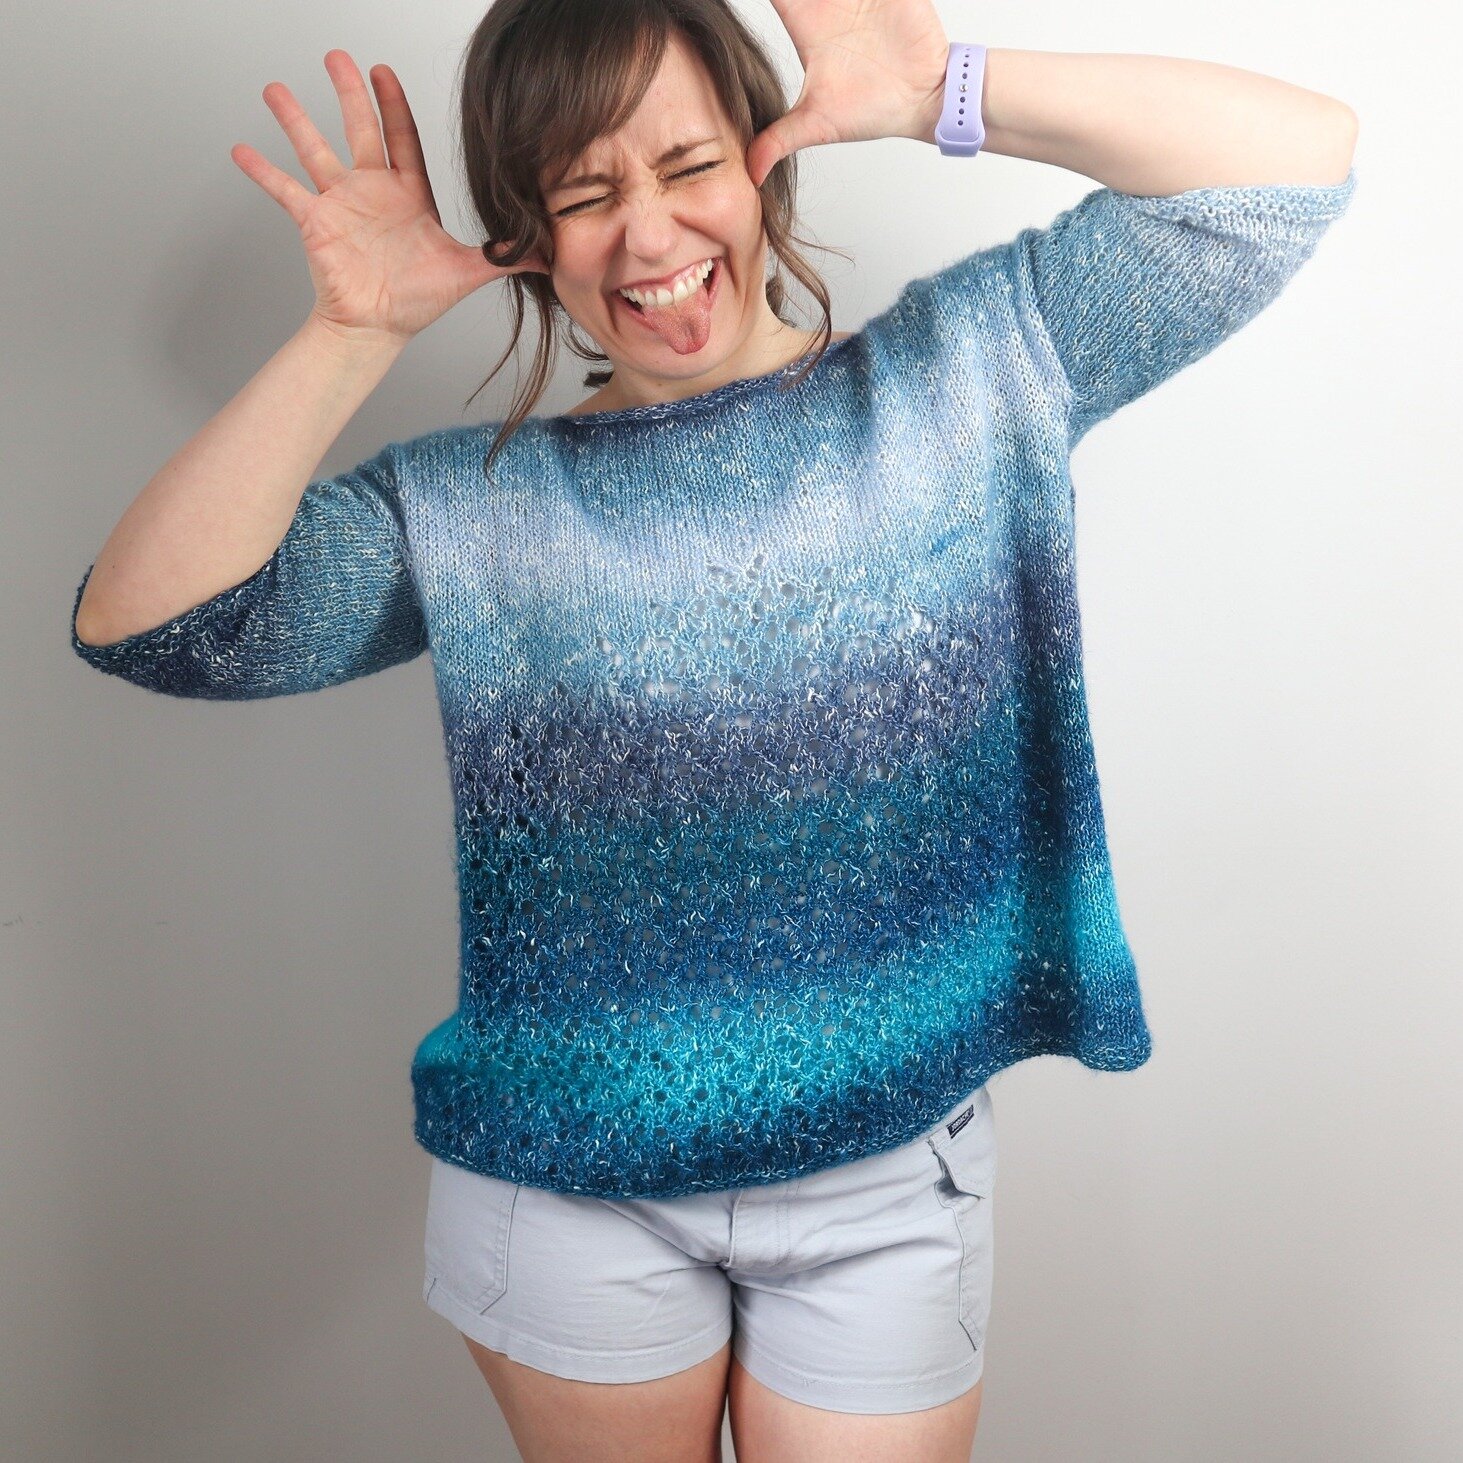 Ocean Meets Sky Sweater!! So gorgeous in variegated yarn. That fade 🥹 

I was crushed to see this yarn was discontinued 🥲

But, there's tons of cool weight 4 yarns you can make this sweater in. You might even have the perfect yarn in your stash rig